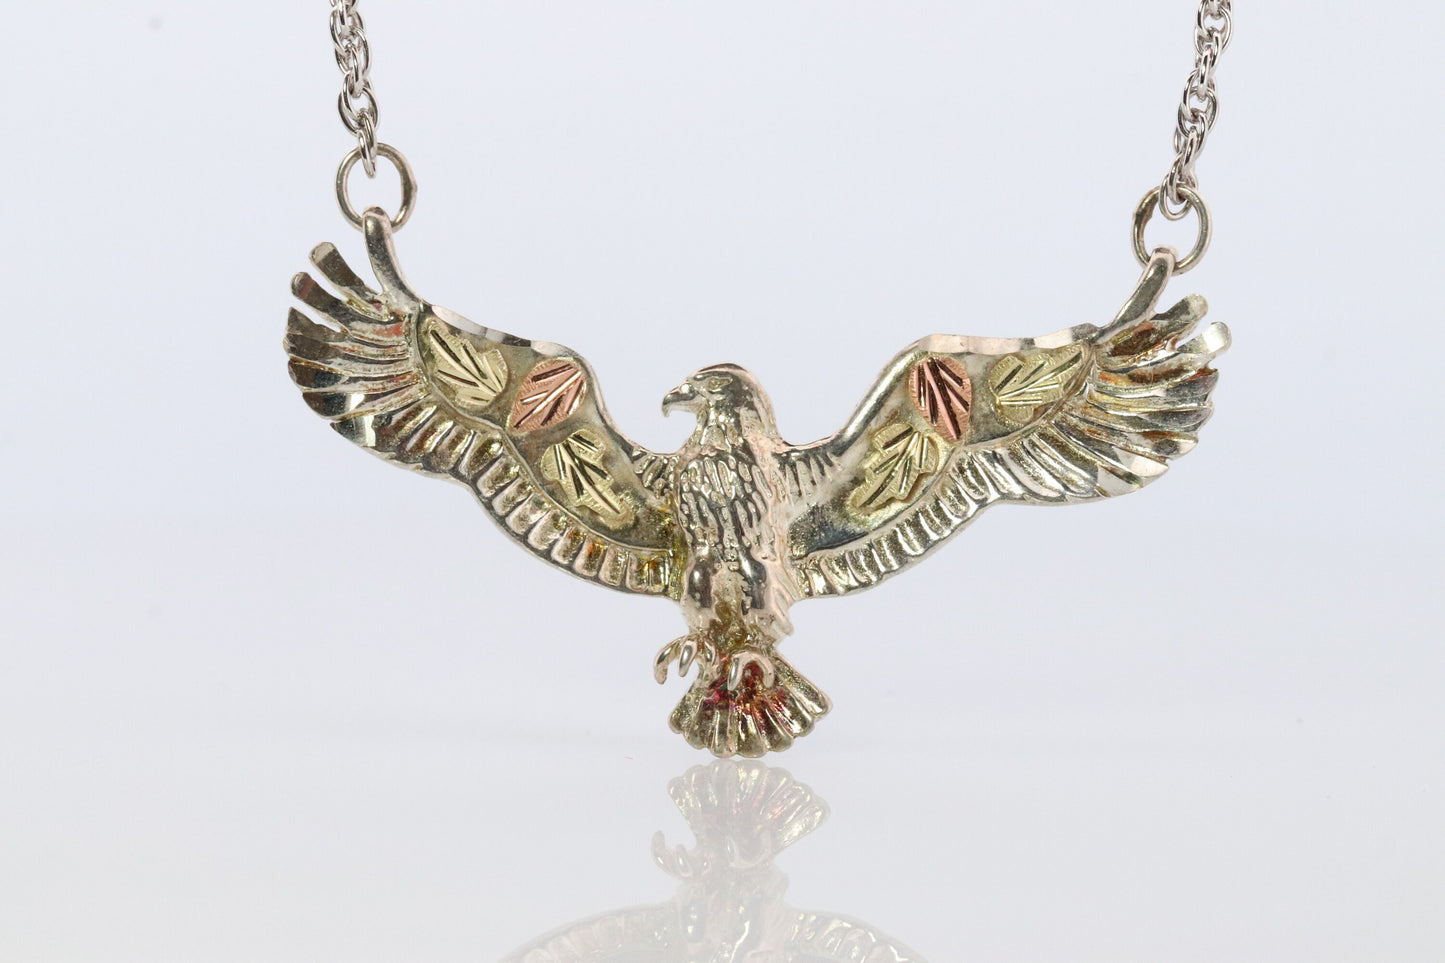 Black Hills Gold EAGLE Necklace. Heavy Vintage Sterling Silver and 12k/10k Pendant and Necklace made by Black Hills Gold.